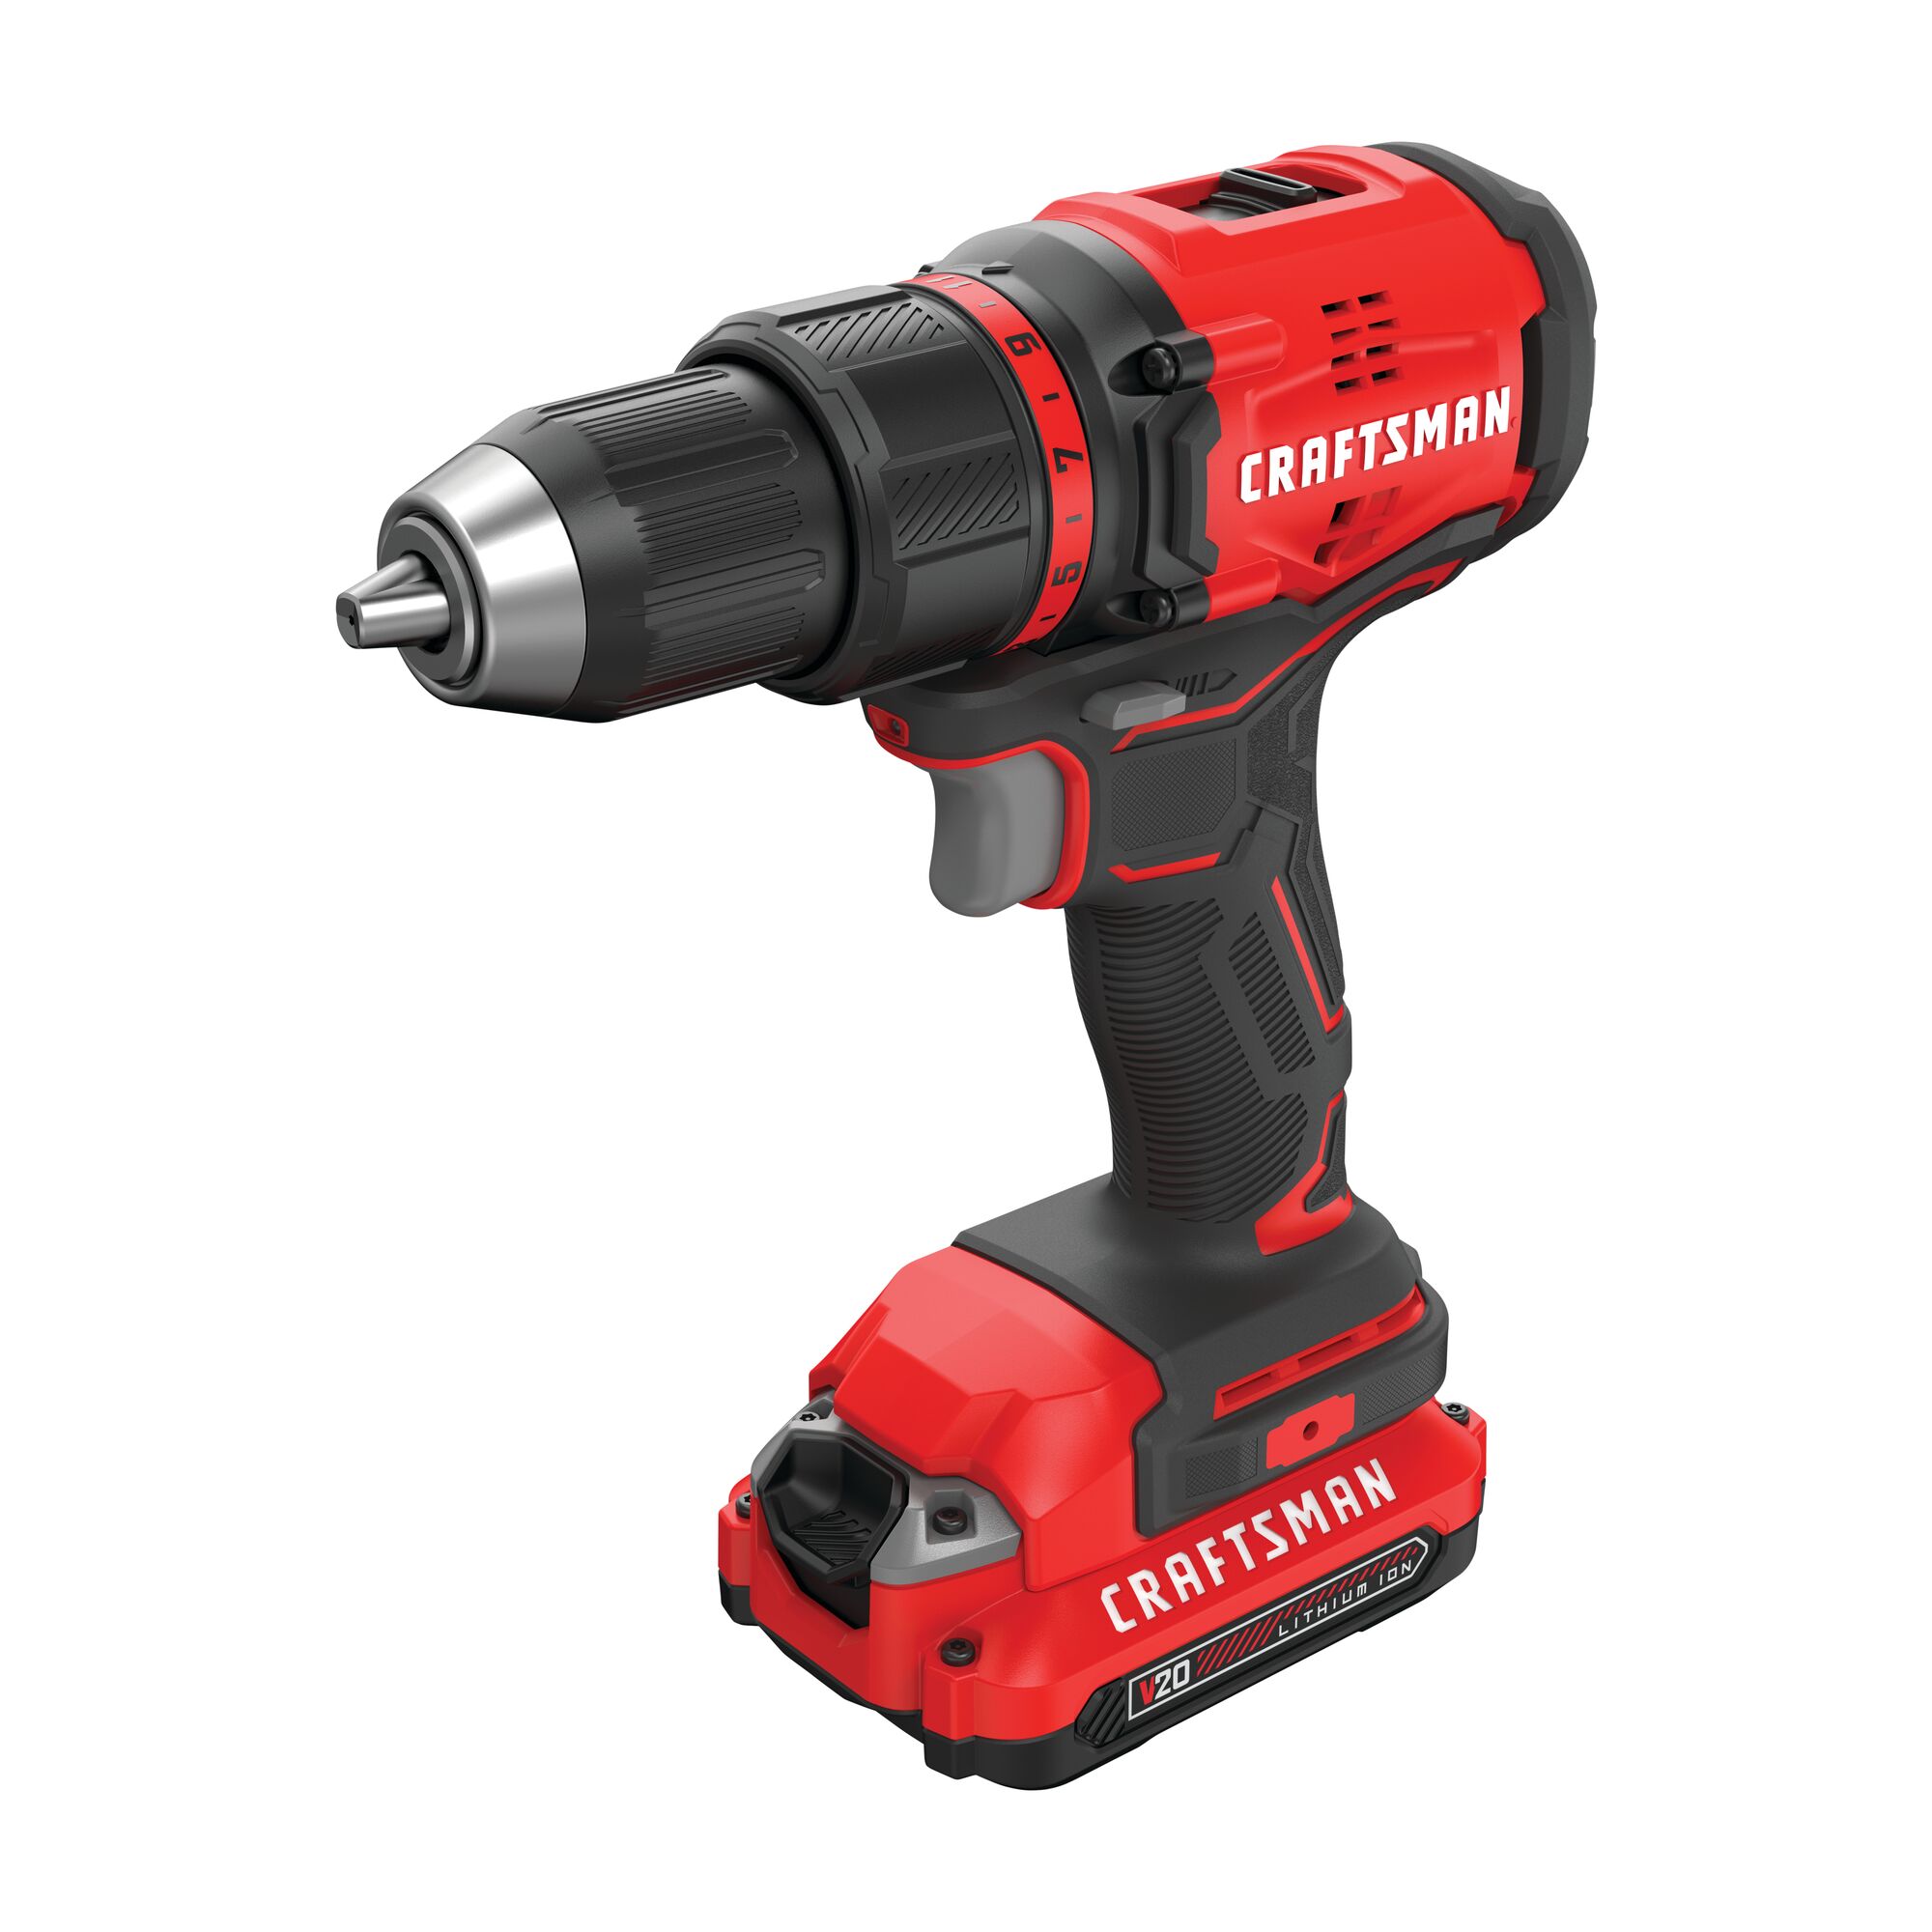 Cordless brushless half inch drill and driver kit 1 battery.